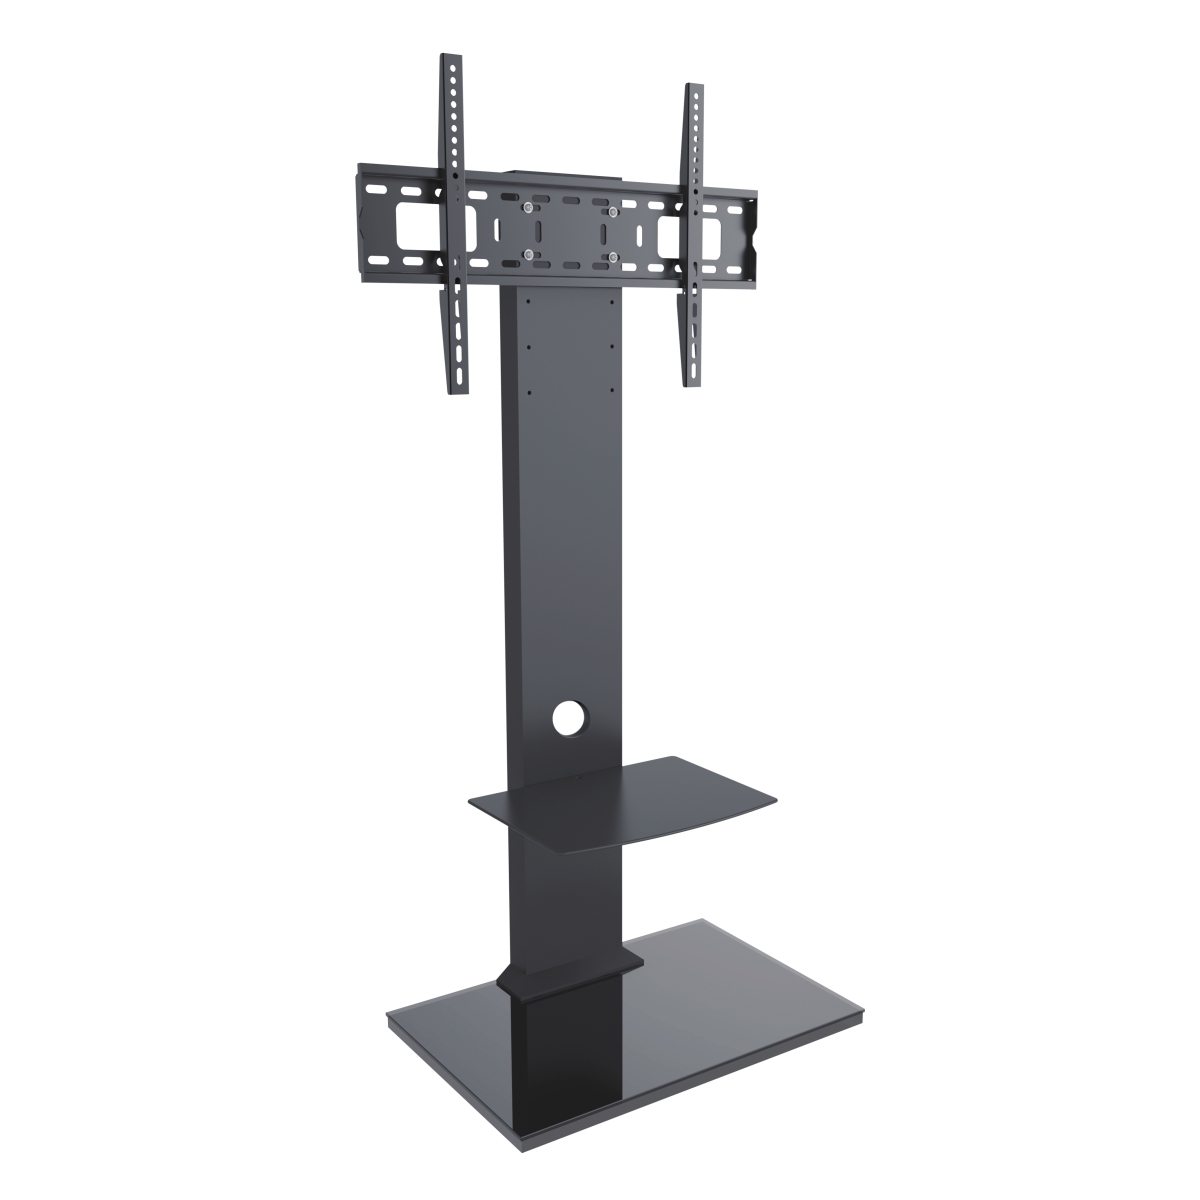 Lcd84112blk Tv Stand For 32-55 In. Flat Panel Tv, Black